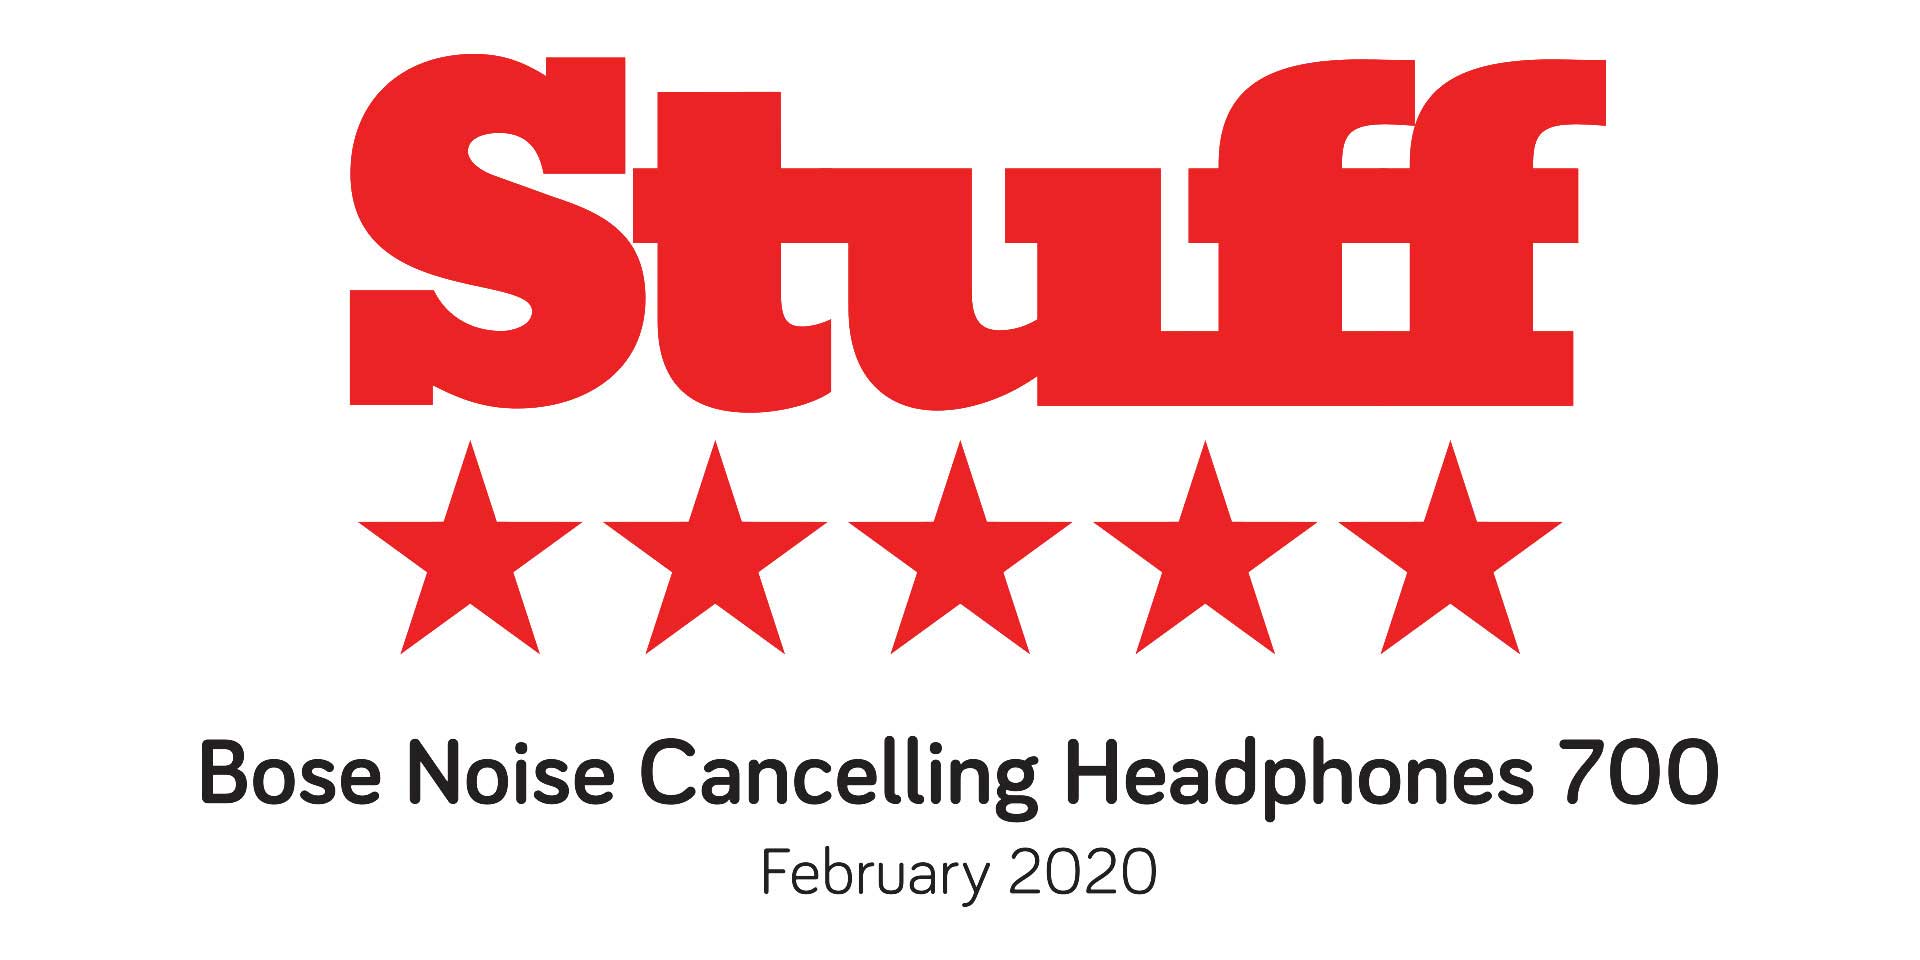 Stuff 5-star review for Bose Noise Cancelling Headphones 700 February 2020 logo